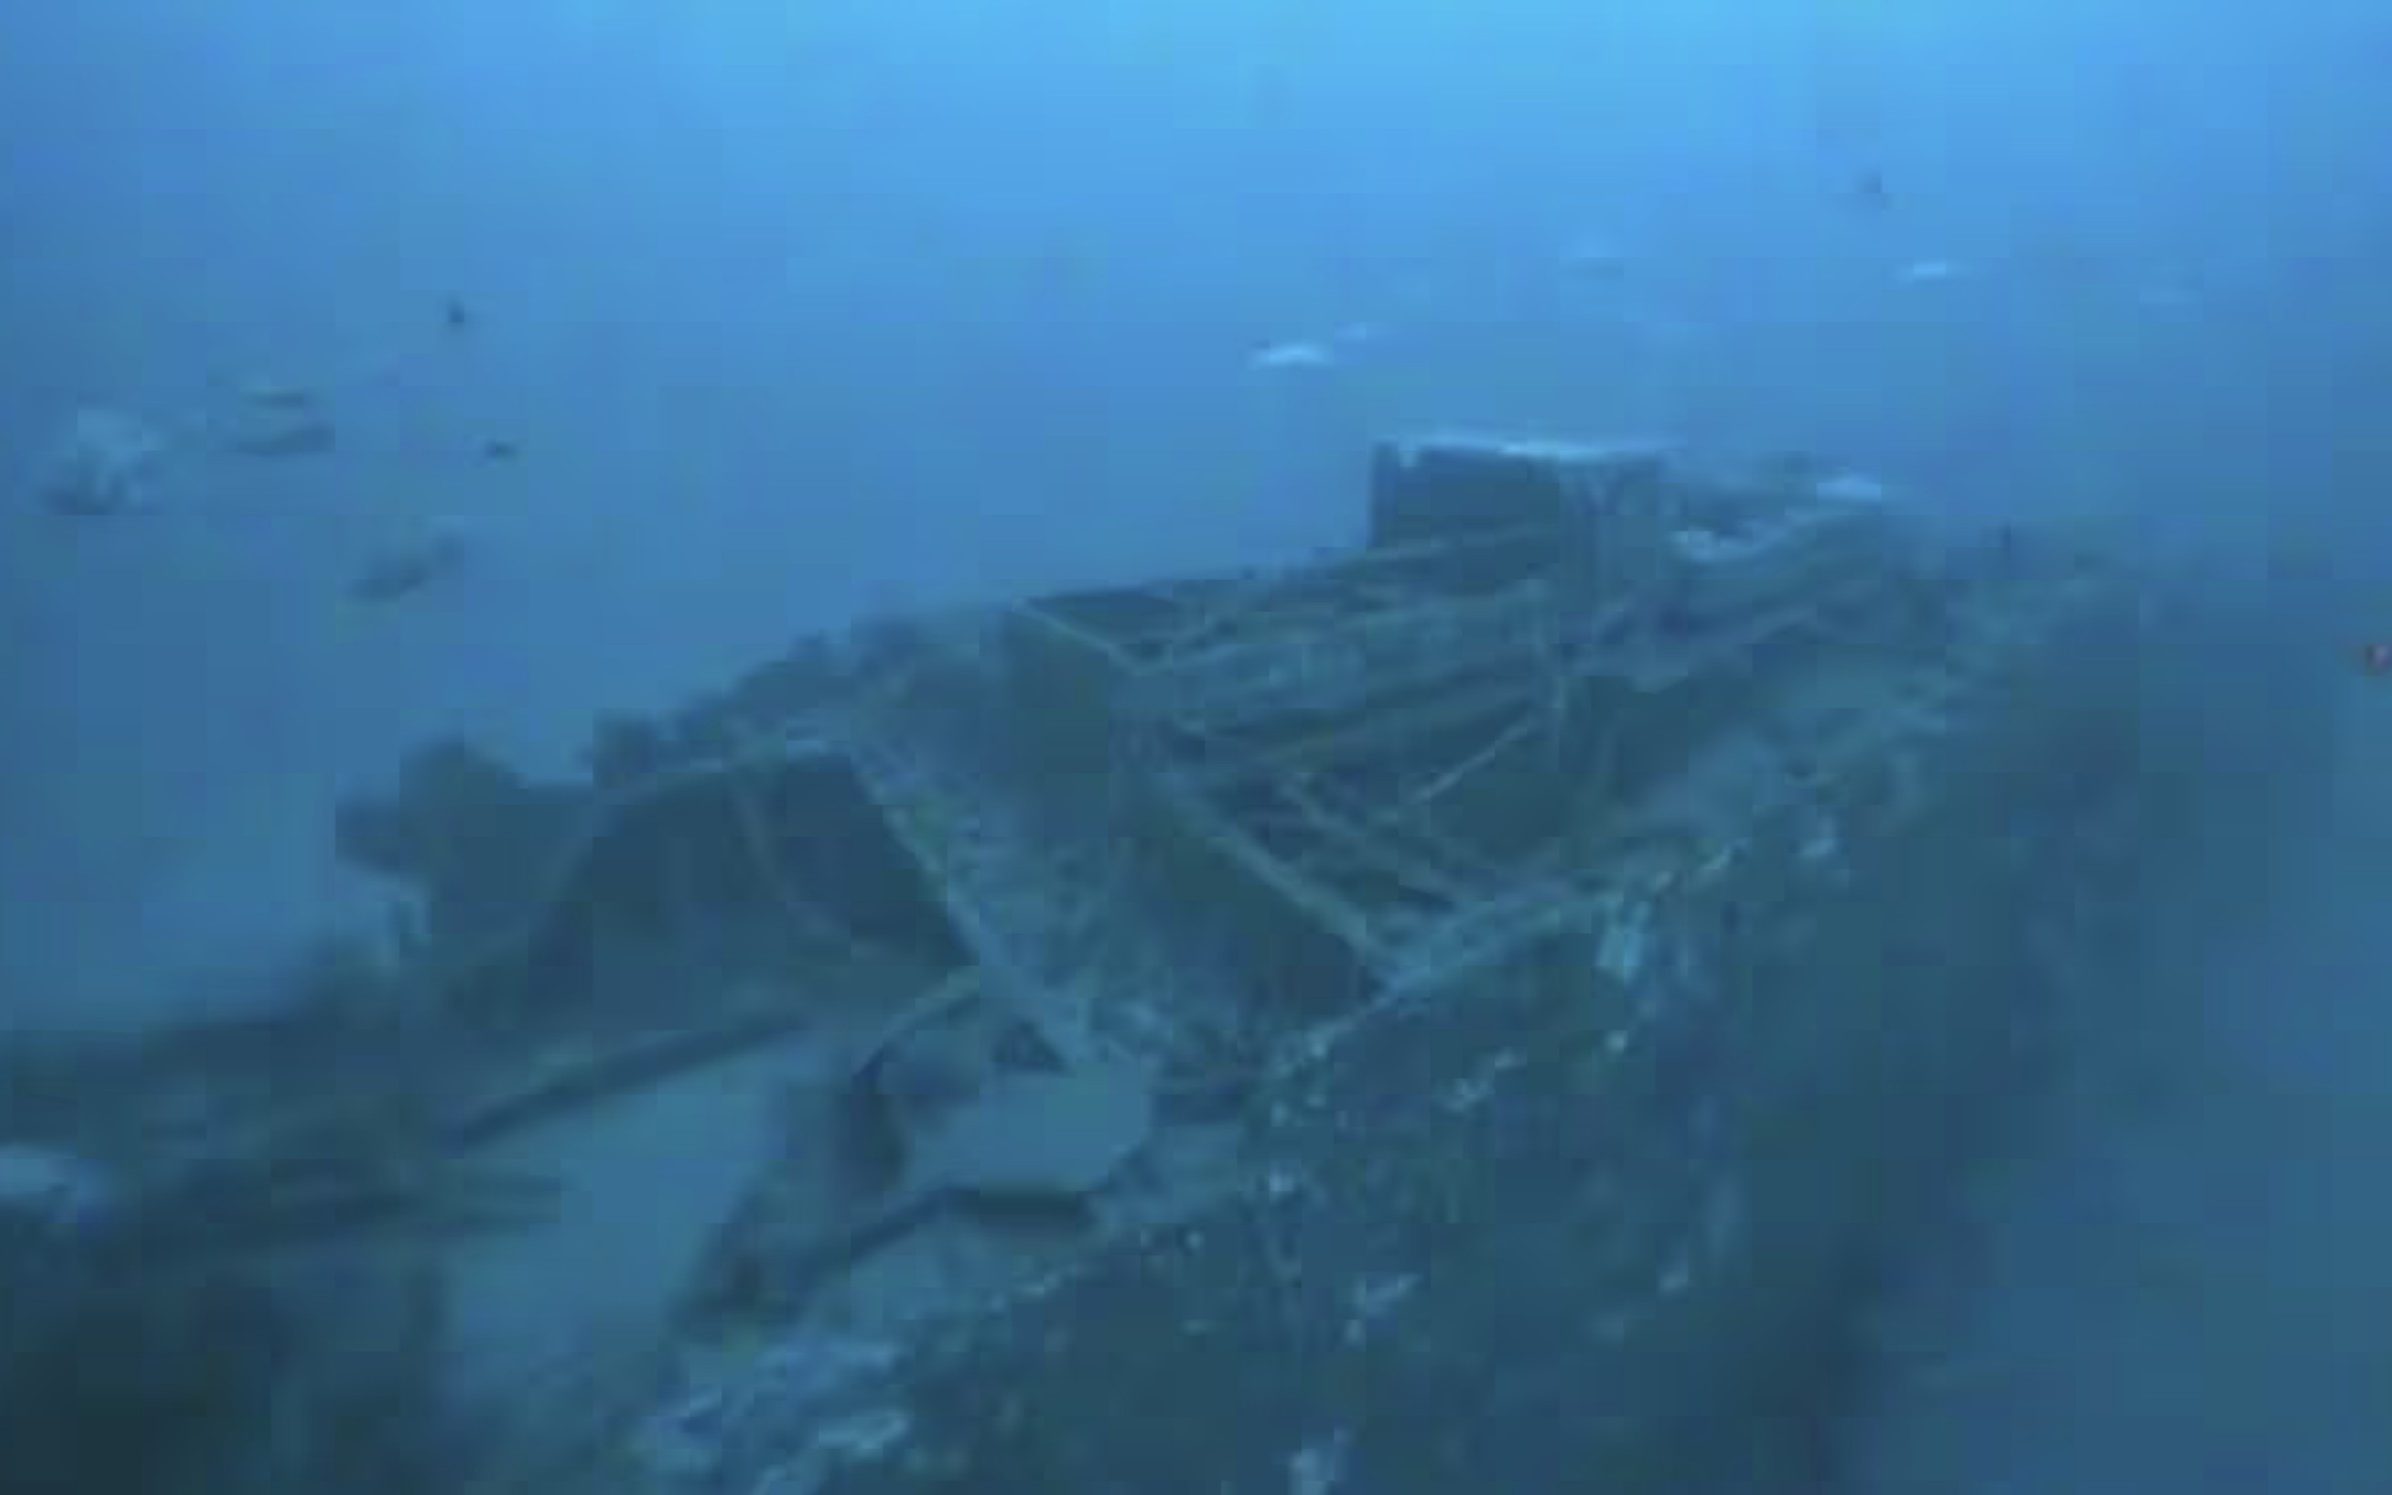 hunt begins for crew members’ relatives after 120-year-old shipwreck mystery is solved